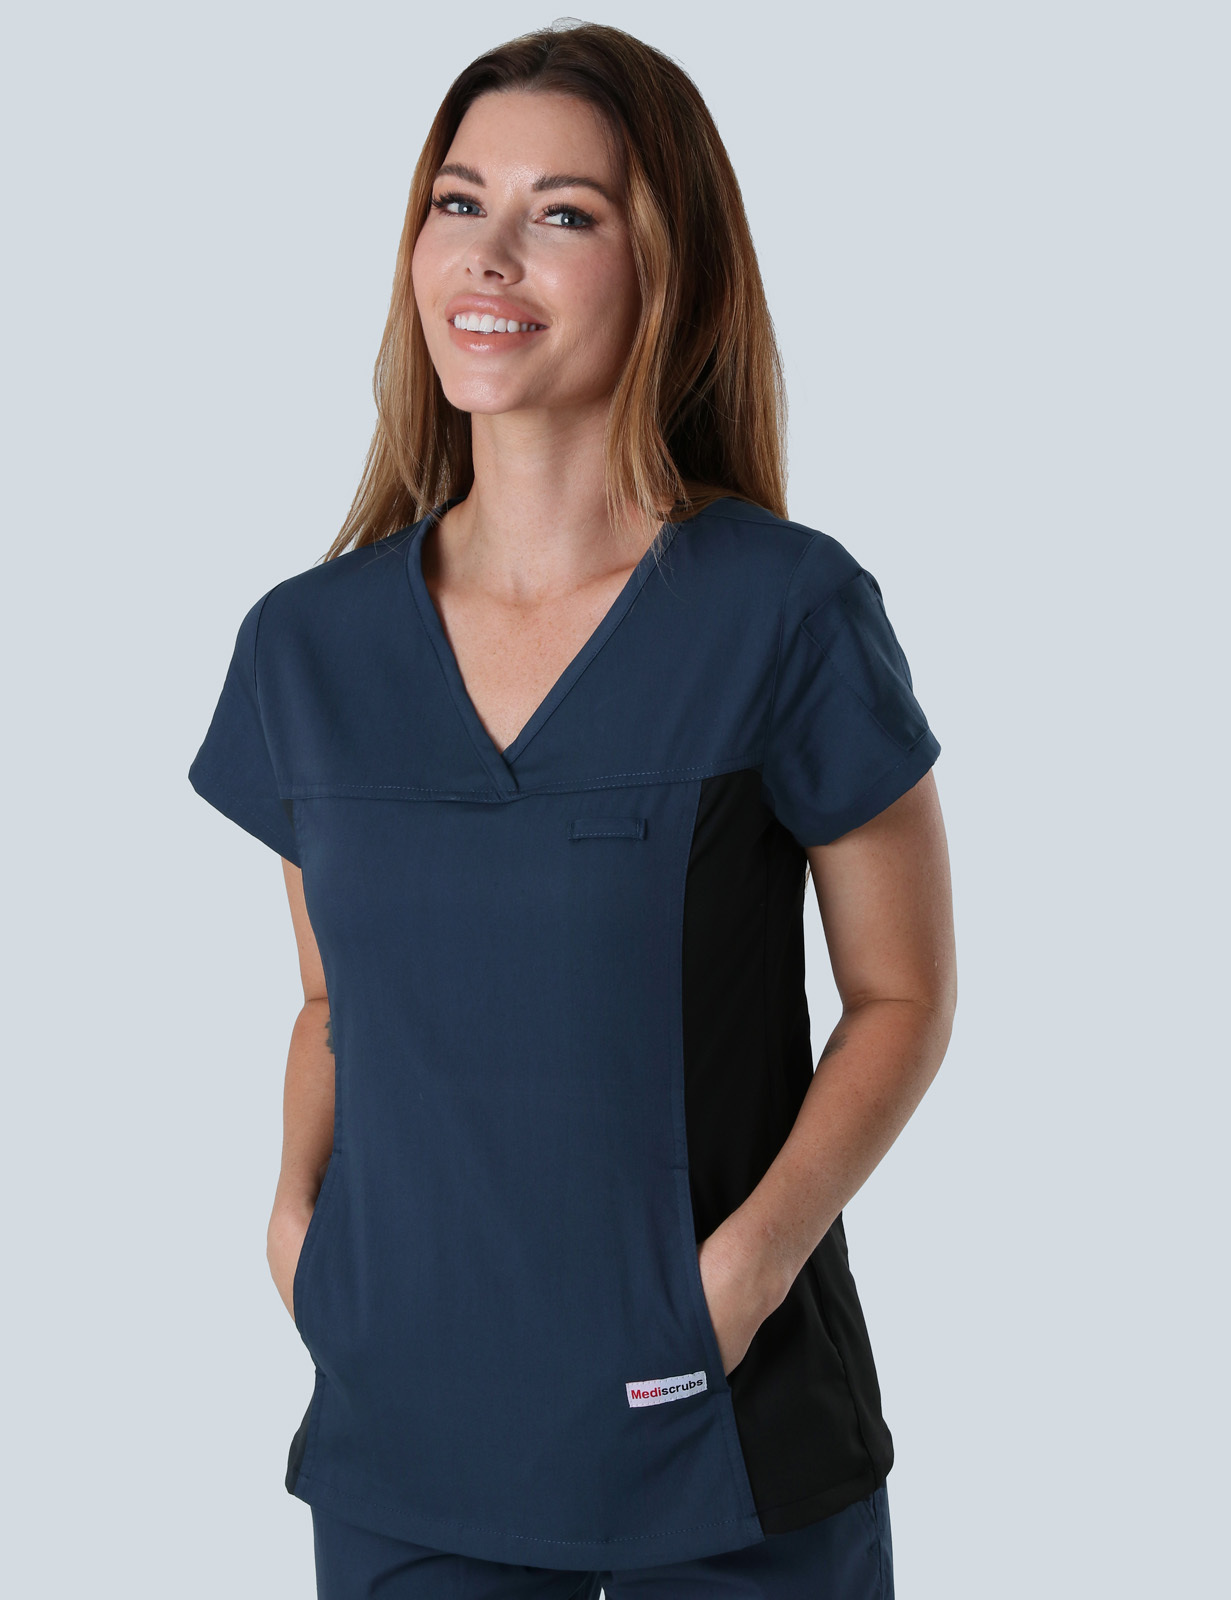 Logan Hospital - ICU RN (Women's Fit Spandex Scrub Top and Cargo Pants in Navy incl Logos)